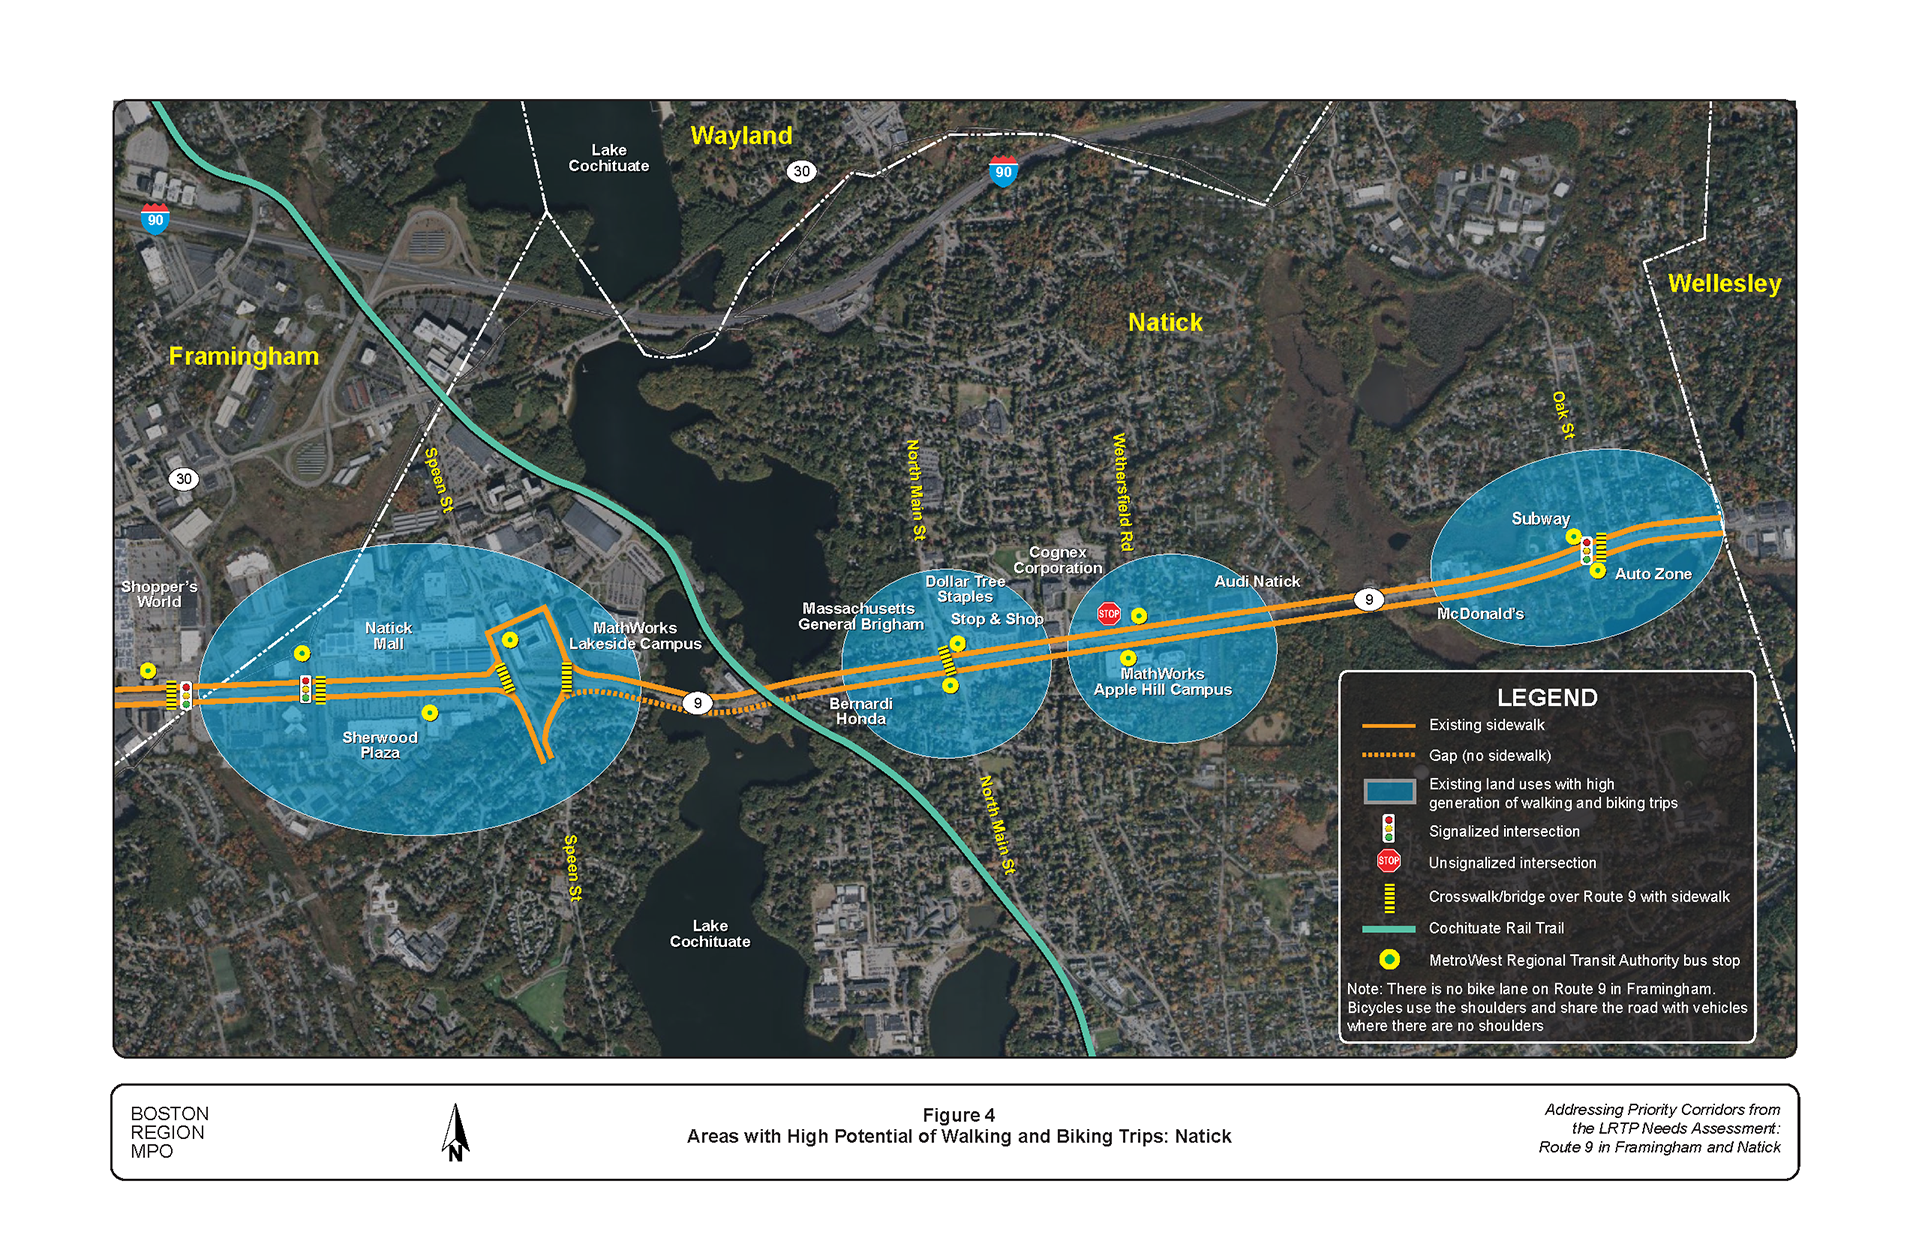 Figure 4 is a map of the corridor showing the areas with high potential of walking and biking trips in Natick